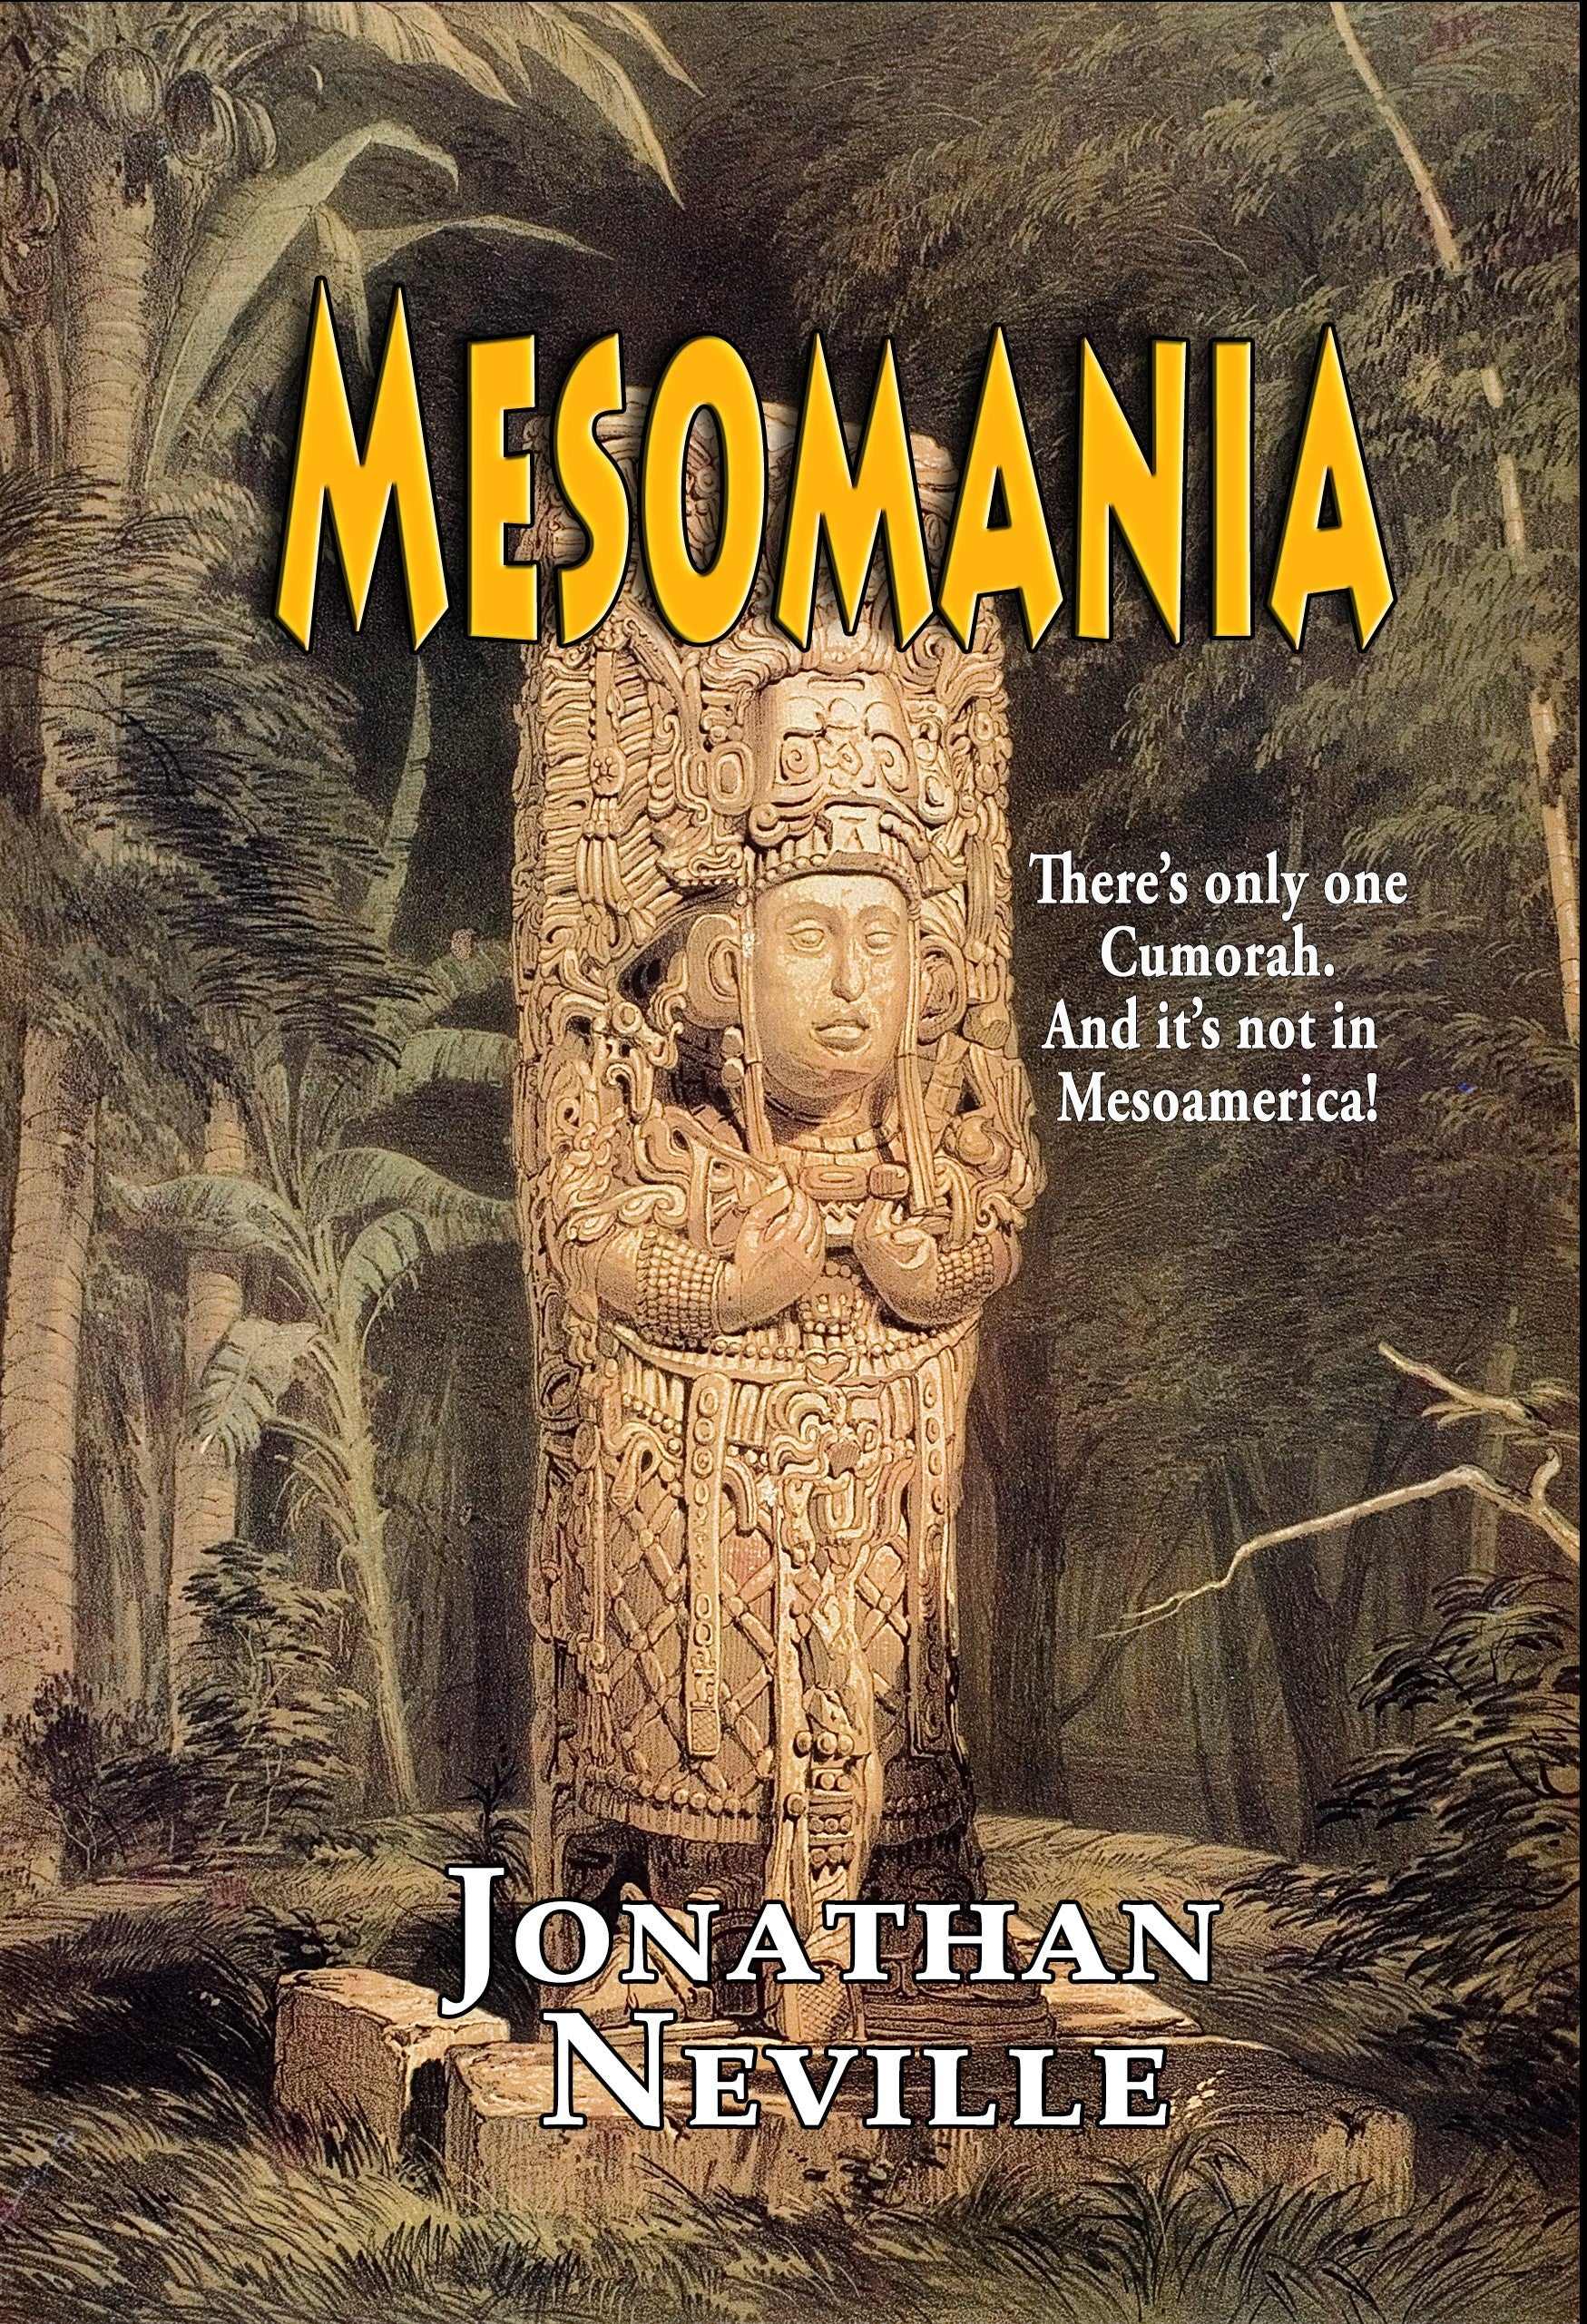 Mesomania: There's Only One Cumorah. And It's Not in Mesoamerica!